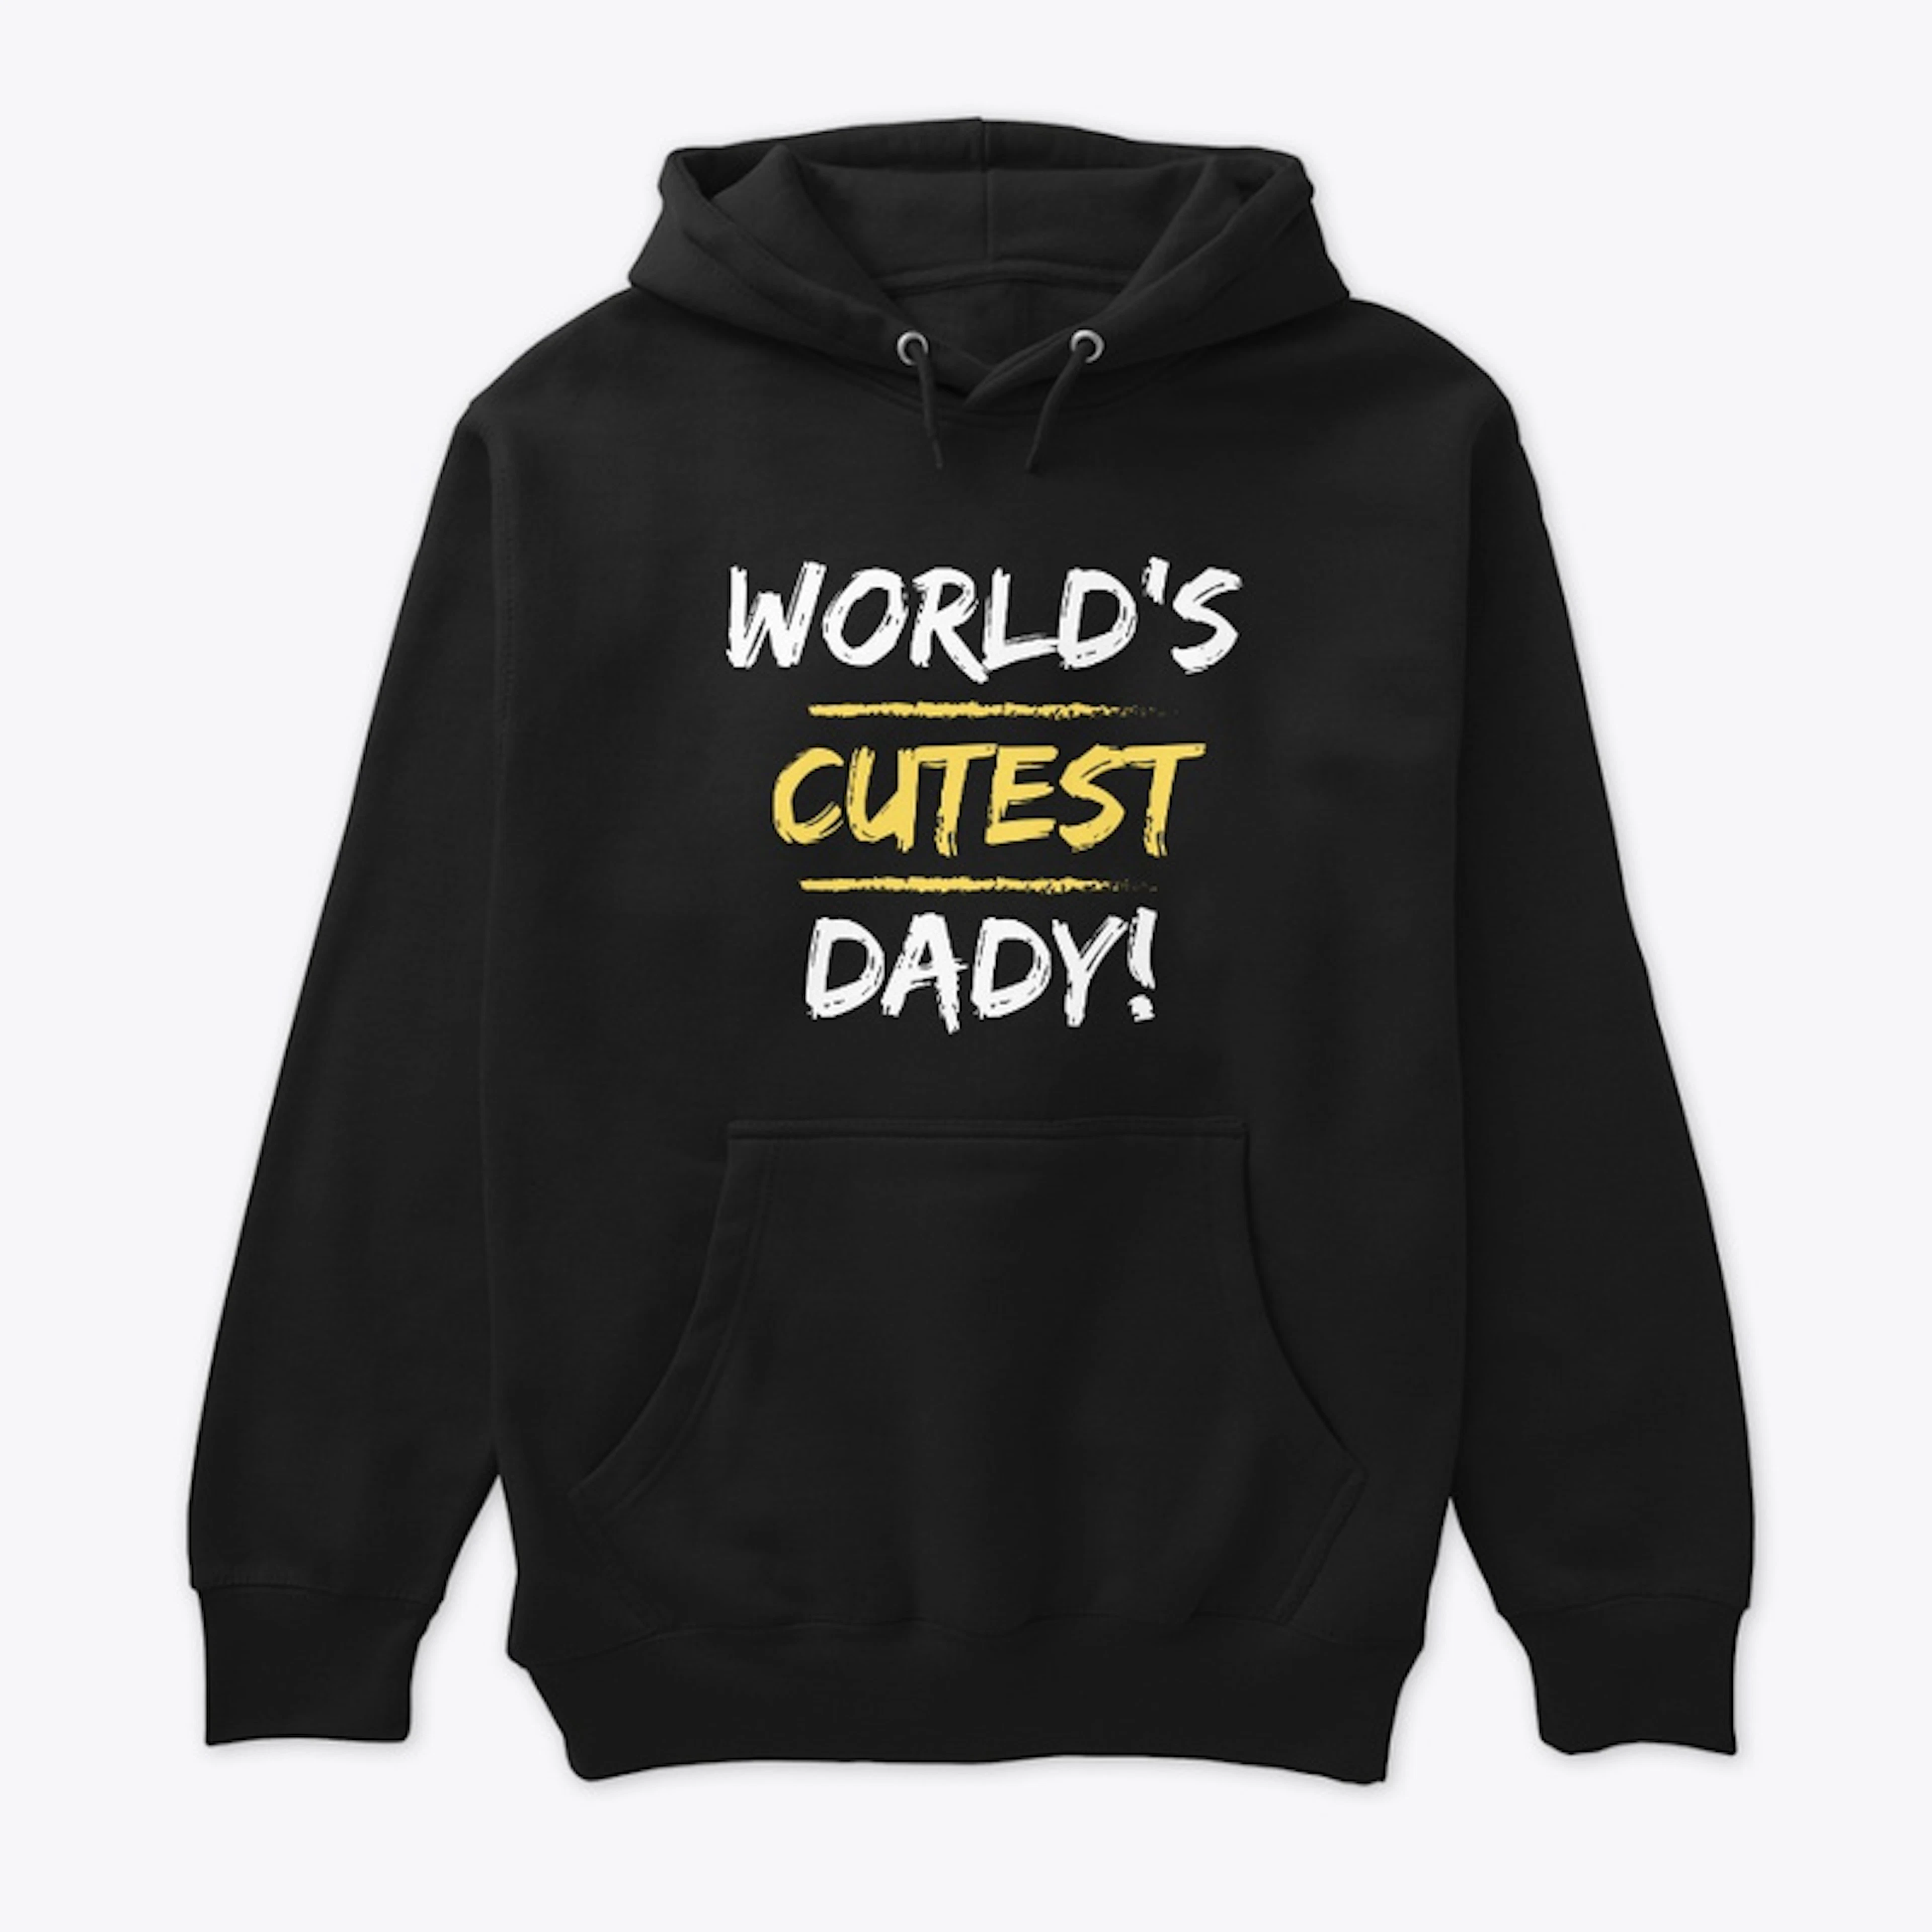 Beautiful Hoodie Design For Males!!!